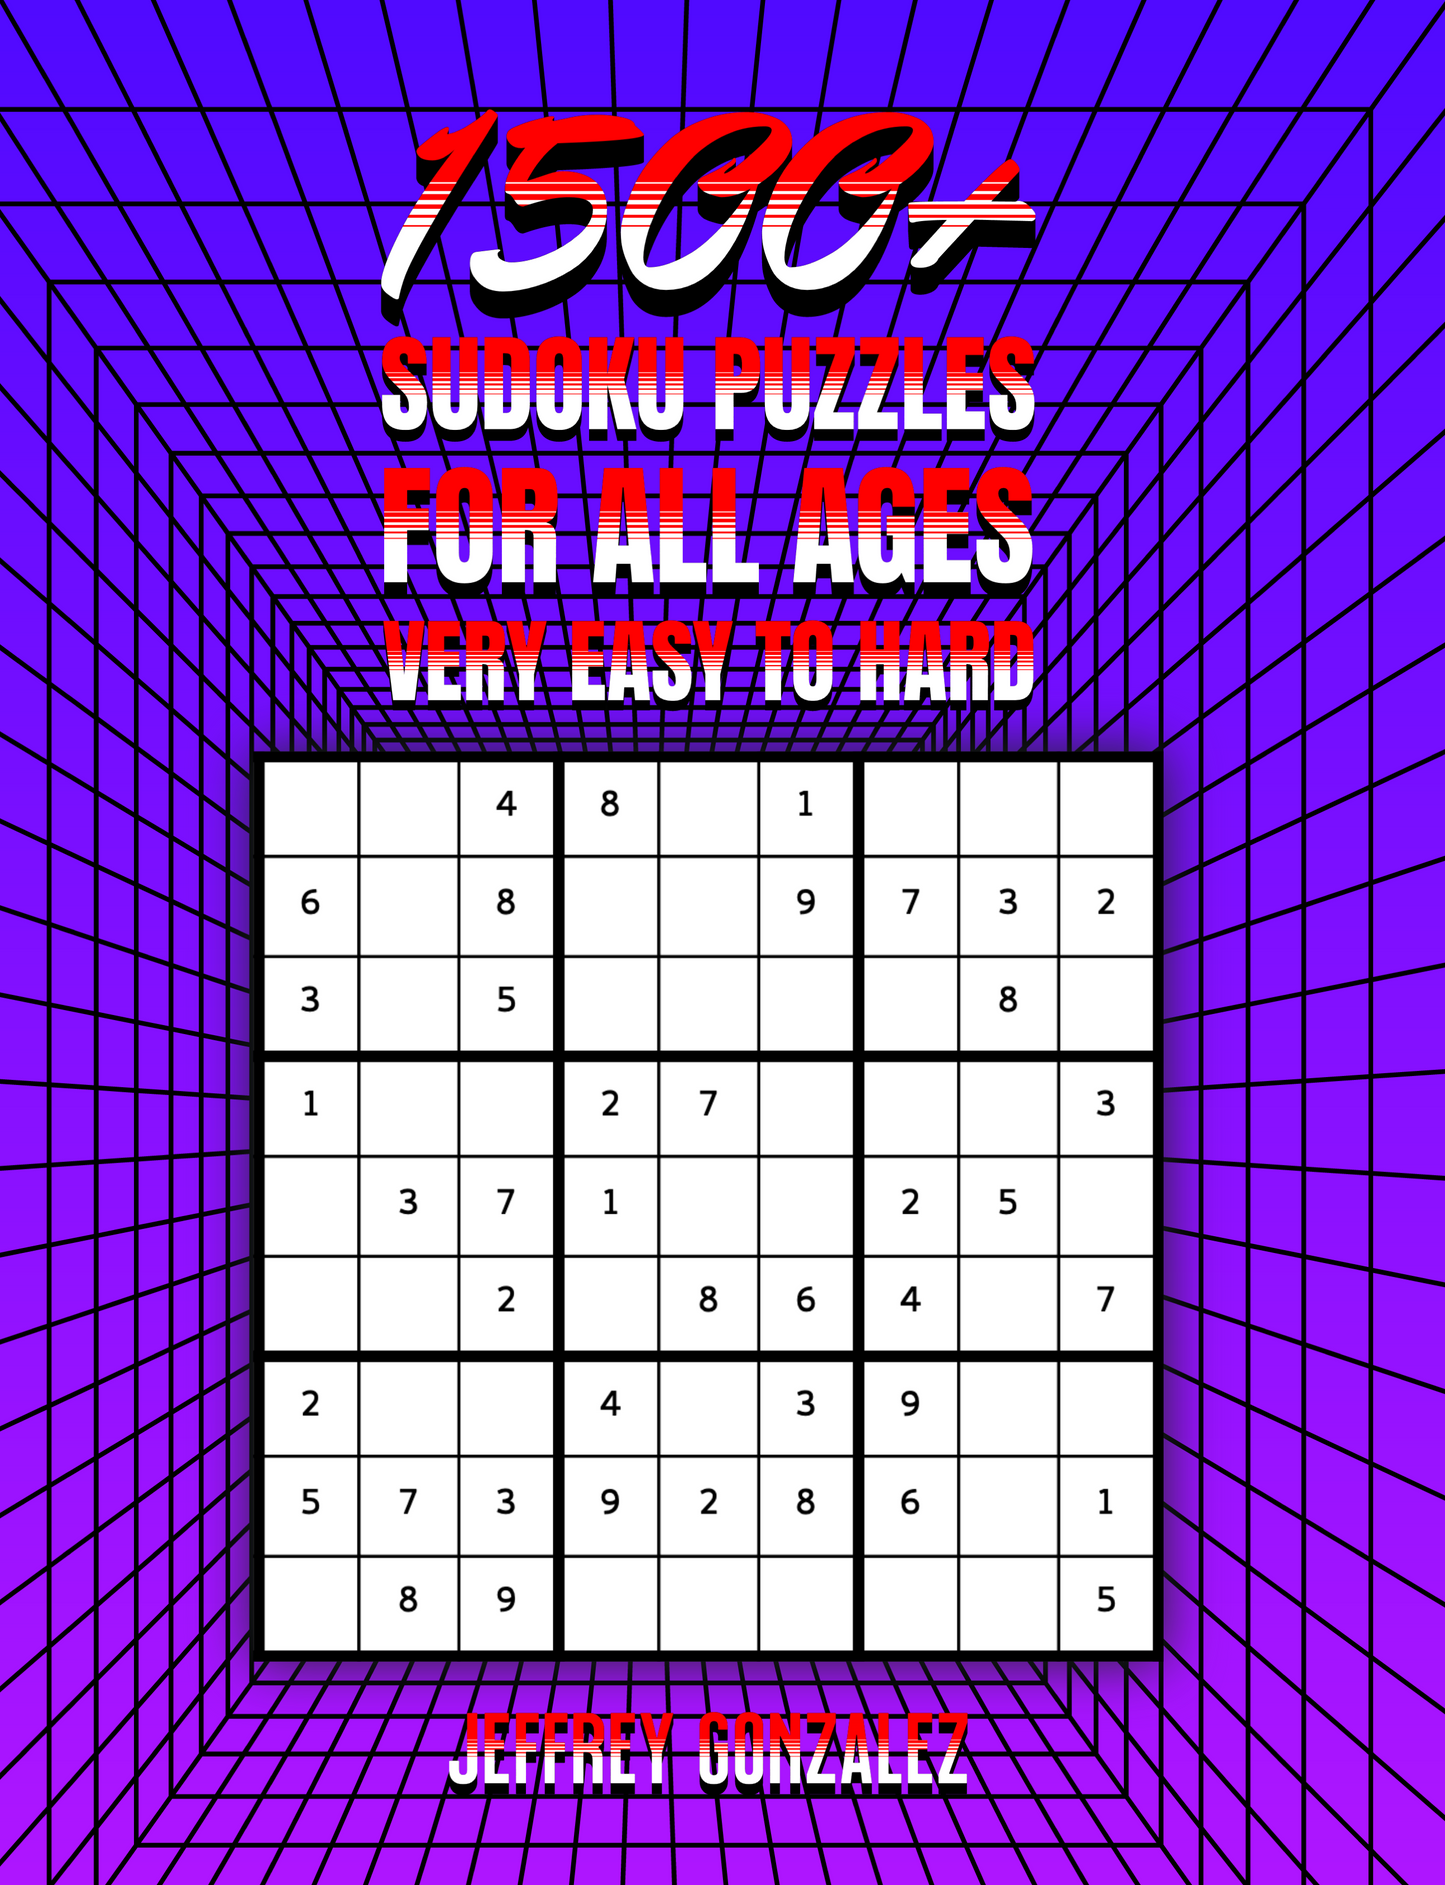 1500+ Sudoku Puzzles for All Ages - Very Easy to Hard - Printable E-Book PDF